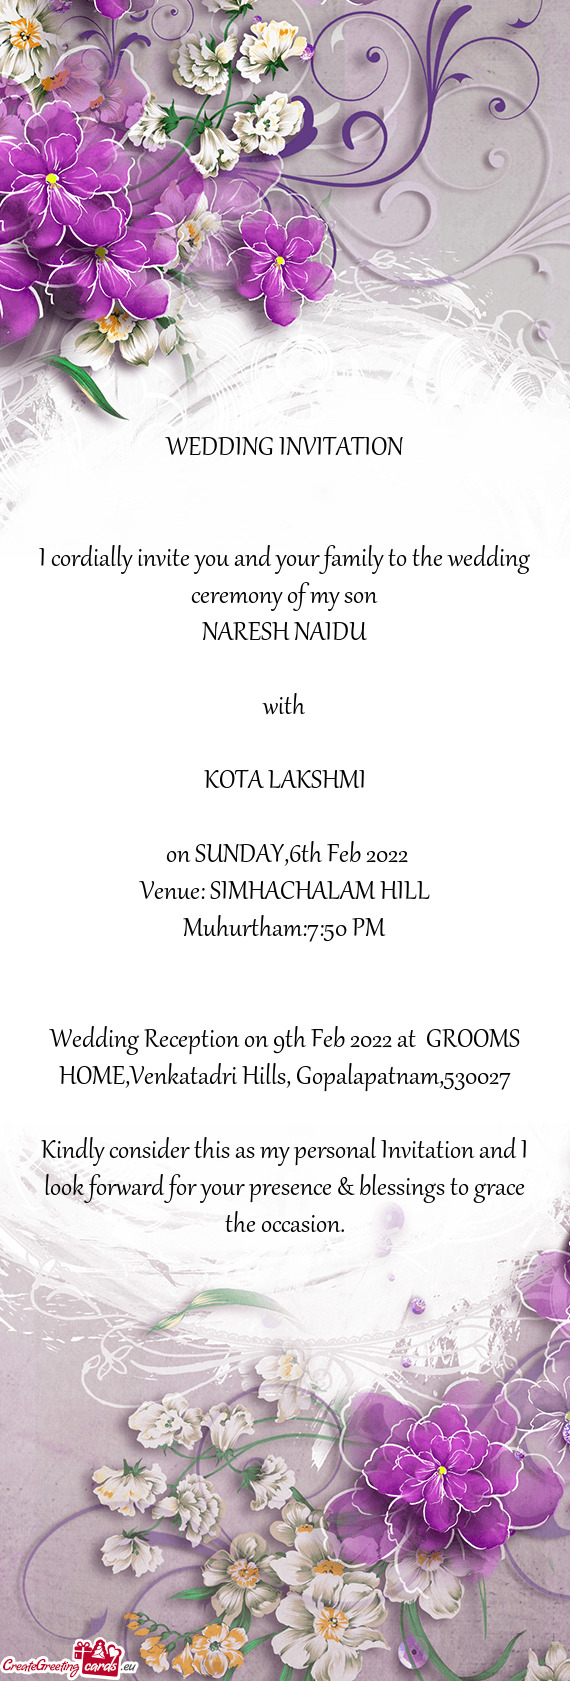 WEDDING INVITATION
 
 
 I cordially invite you and your family to the wedding ceremony of my son
 NA